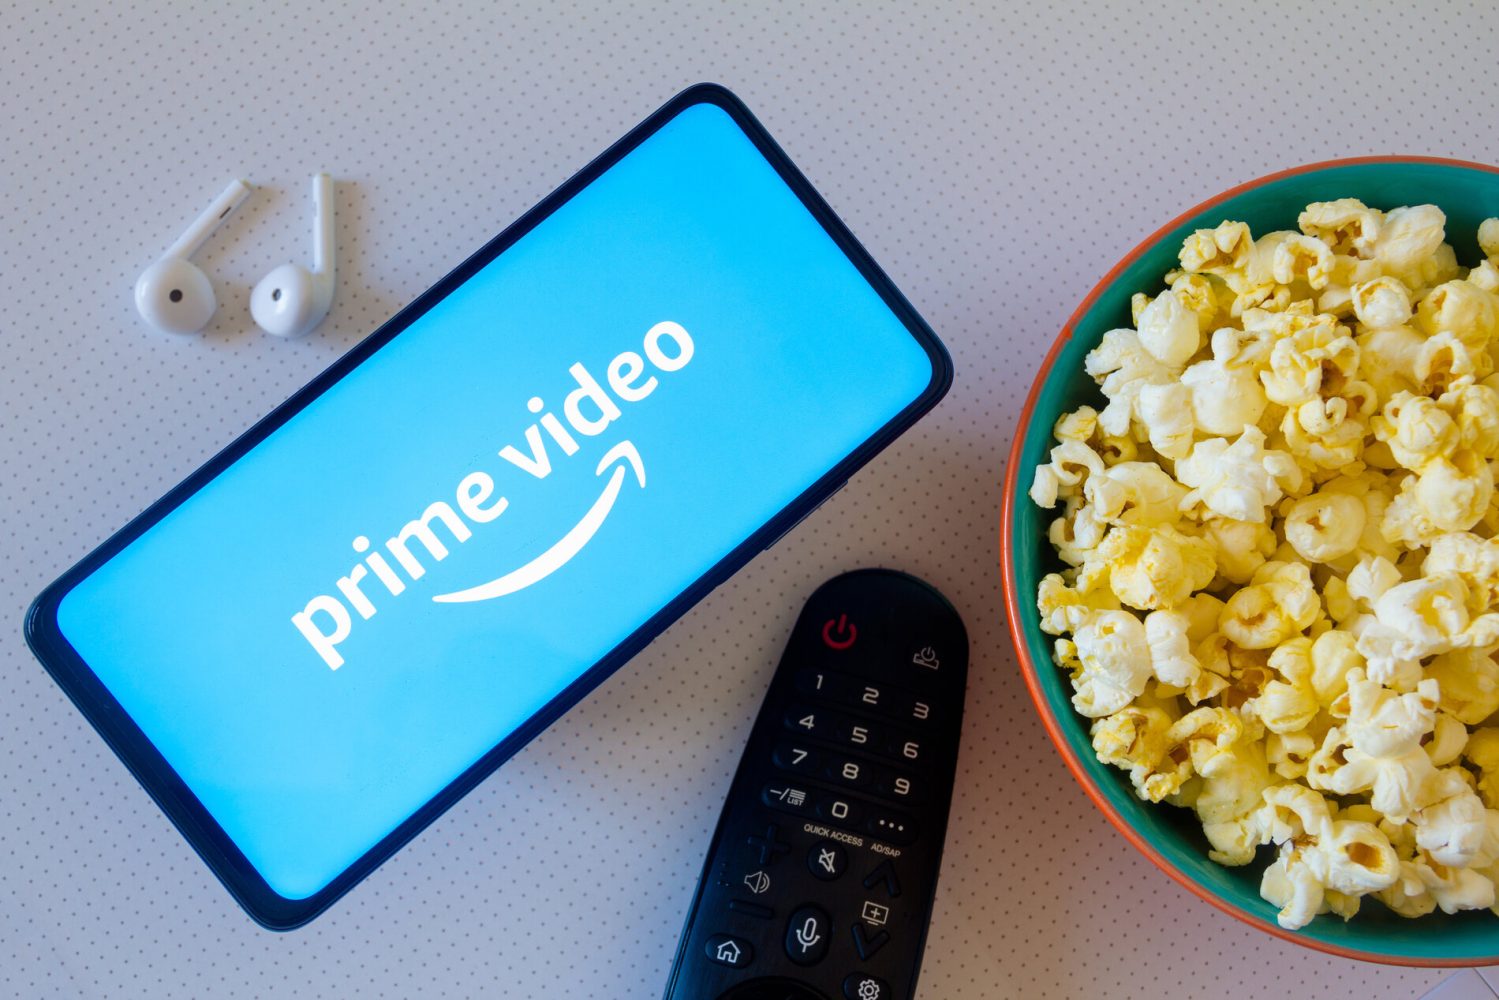 Even Netflix thinks Prime Video is making a mistake by forcing people to watch ads